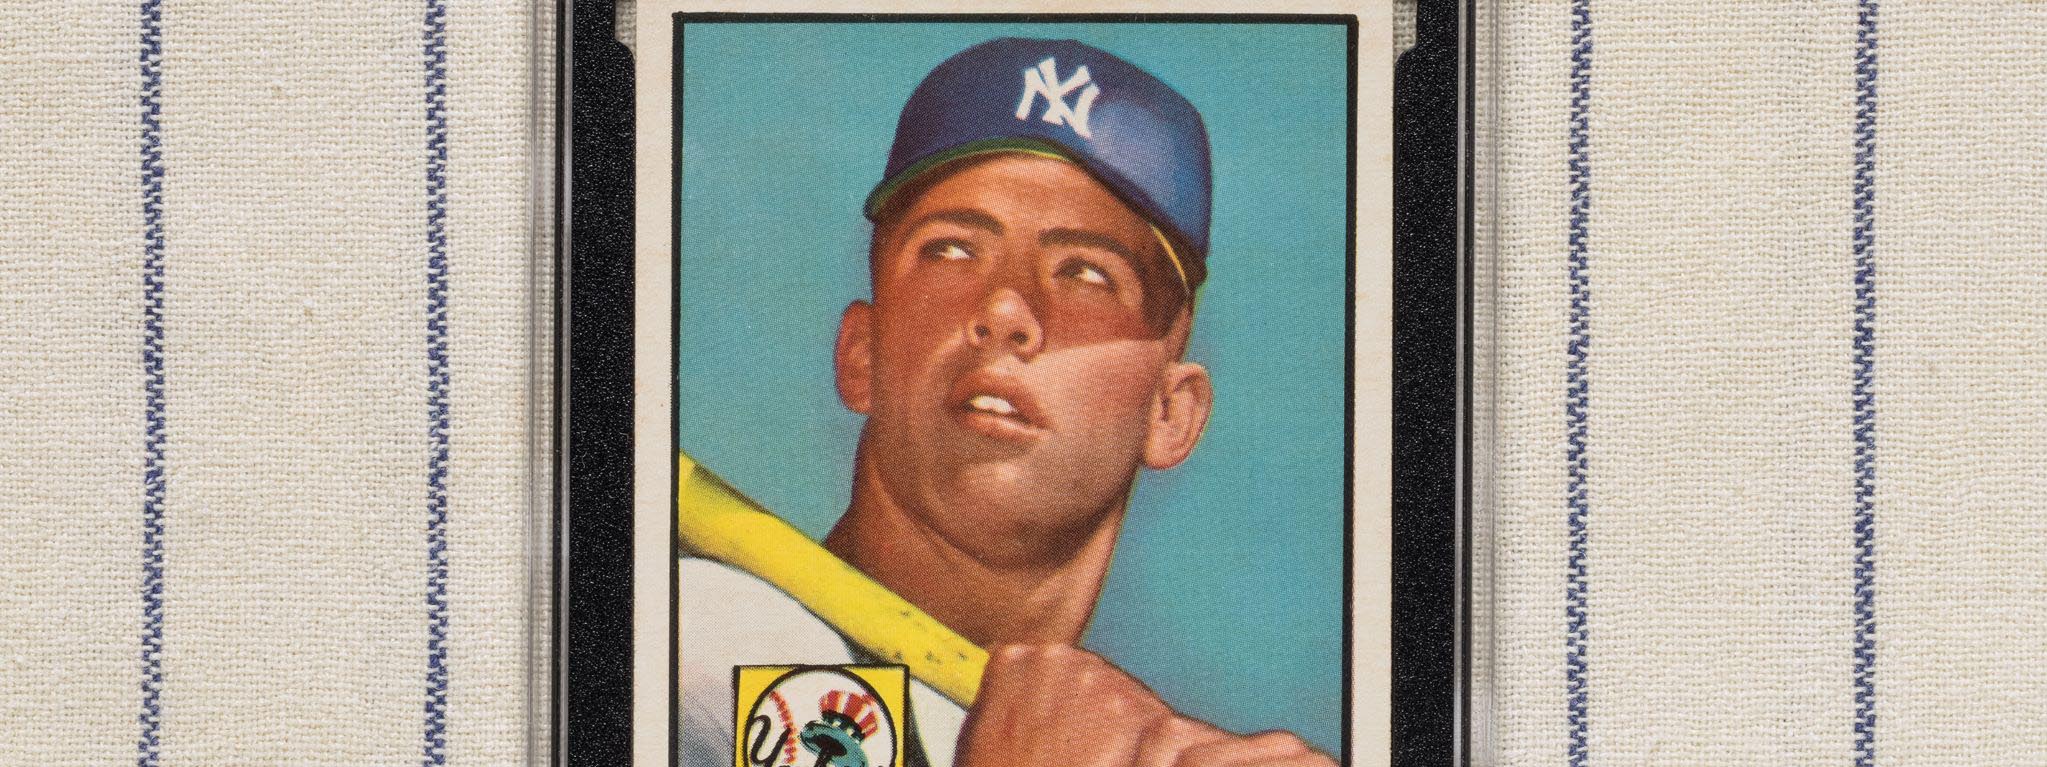 Mint-Condition Mickey Mantle Card Sells for Record-Shattering $12.6 Million